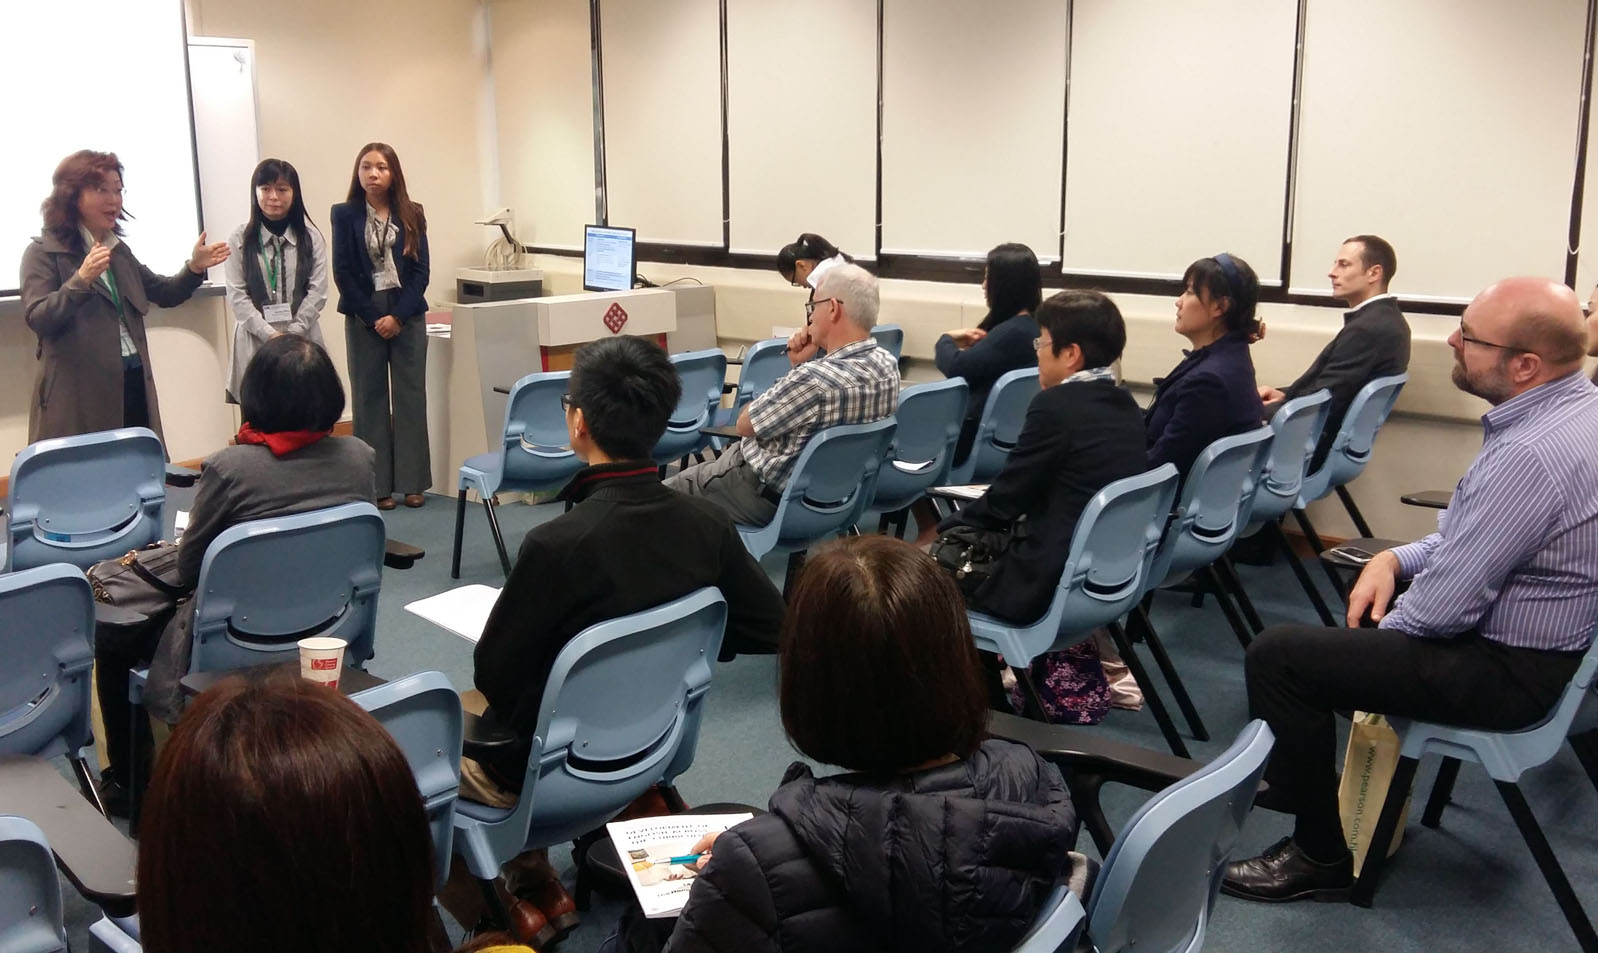 Dr. Vicky Lee making a presentation on “Combating the English literary crisis through Writing Across the Curriculum:  a case study at the Associate Degree level at HKBU CIE.